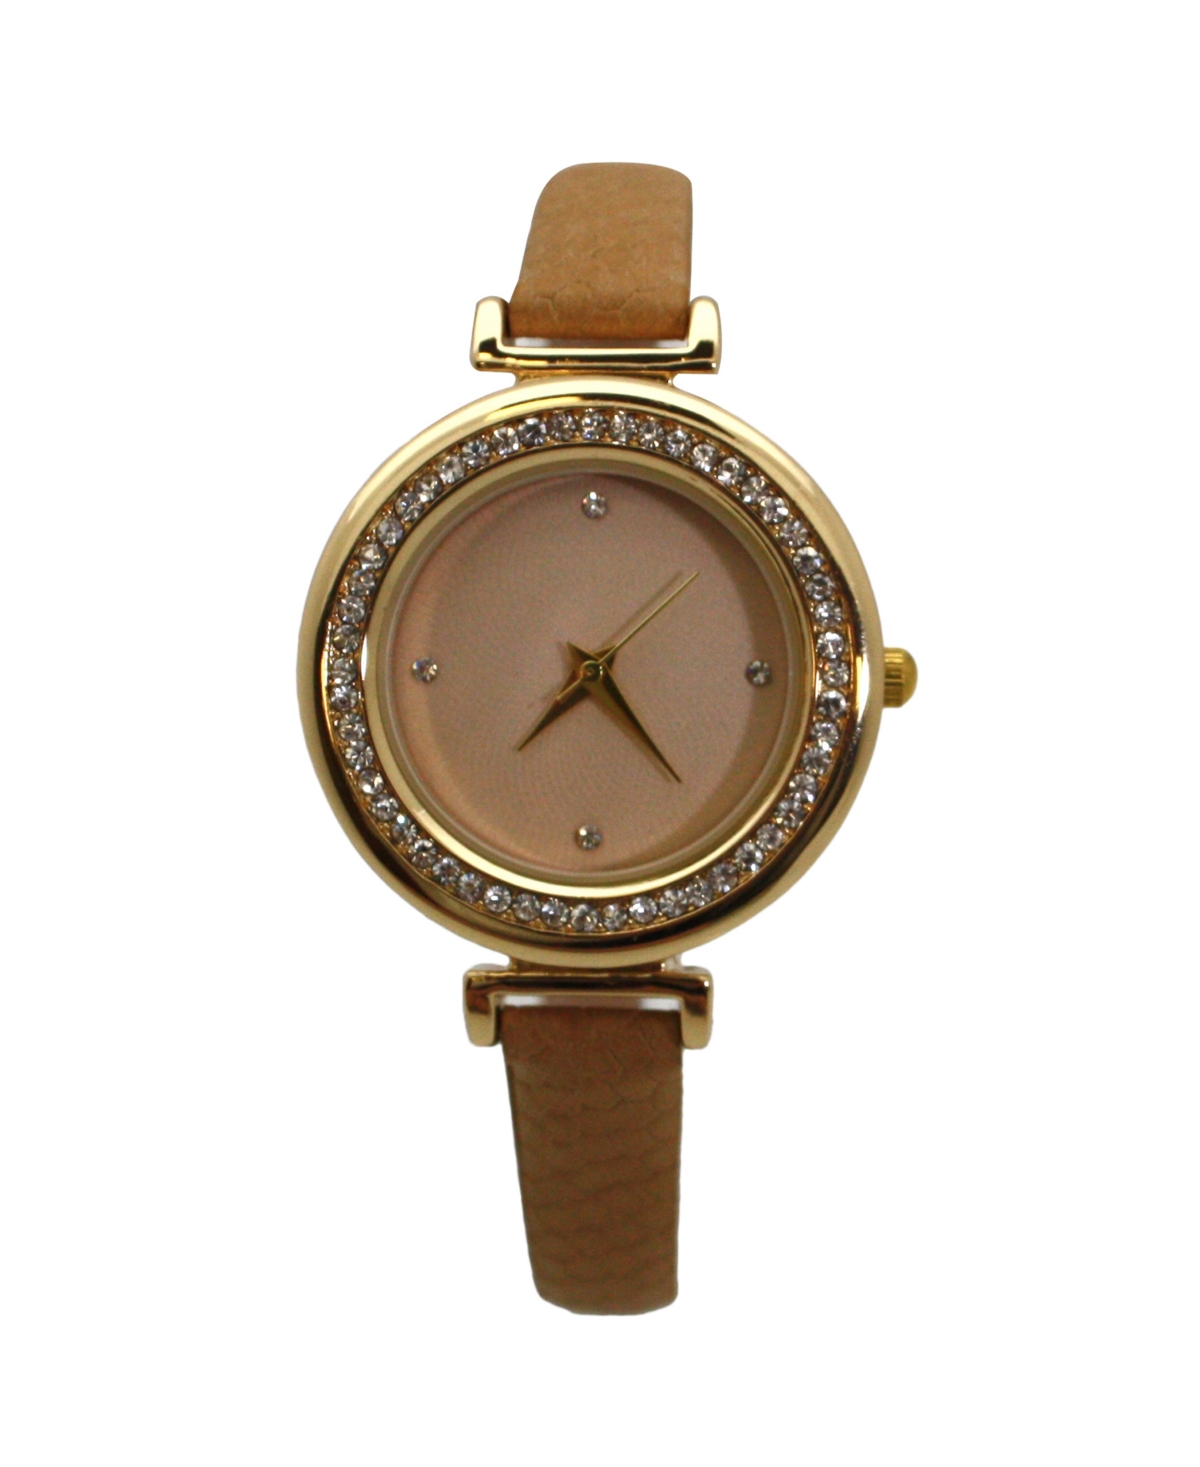 Soft Leather Solid Colors and Rhinestones Women Watch - Beige/Khaki